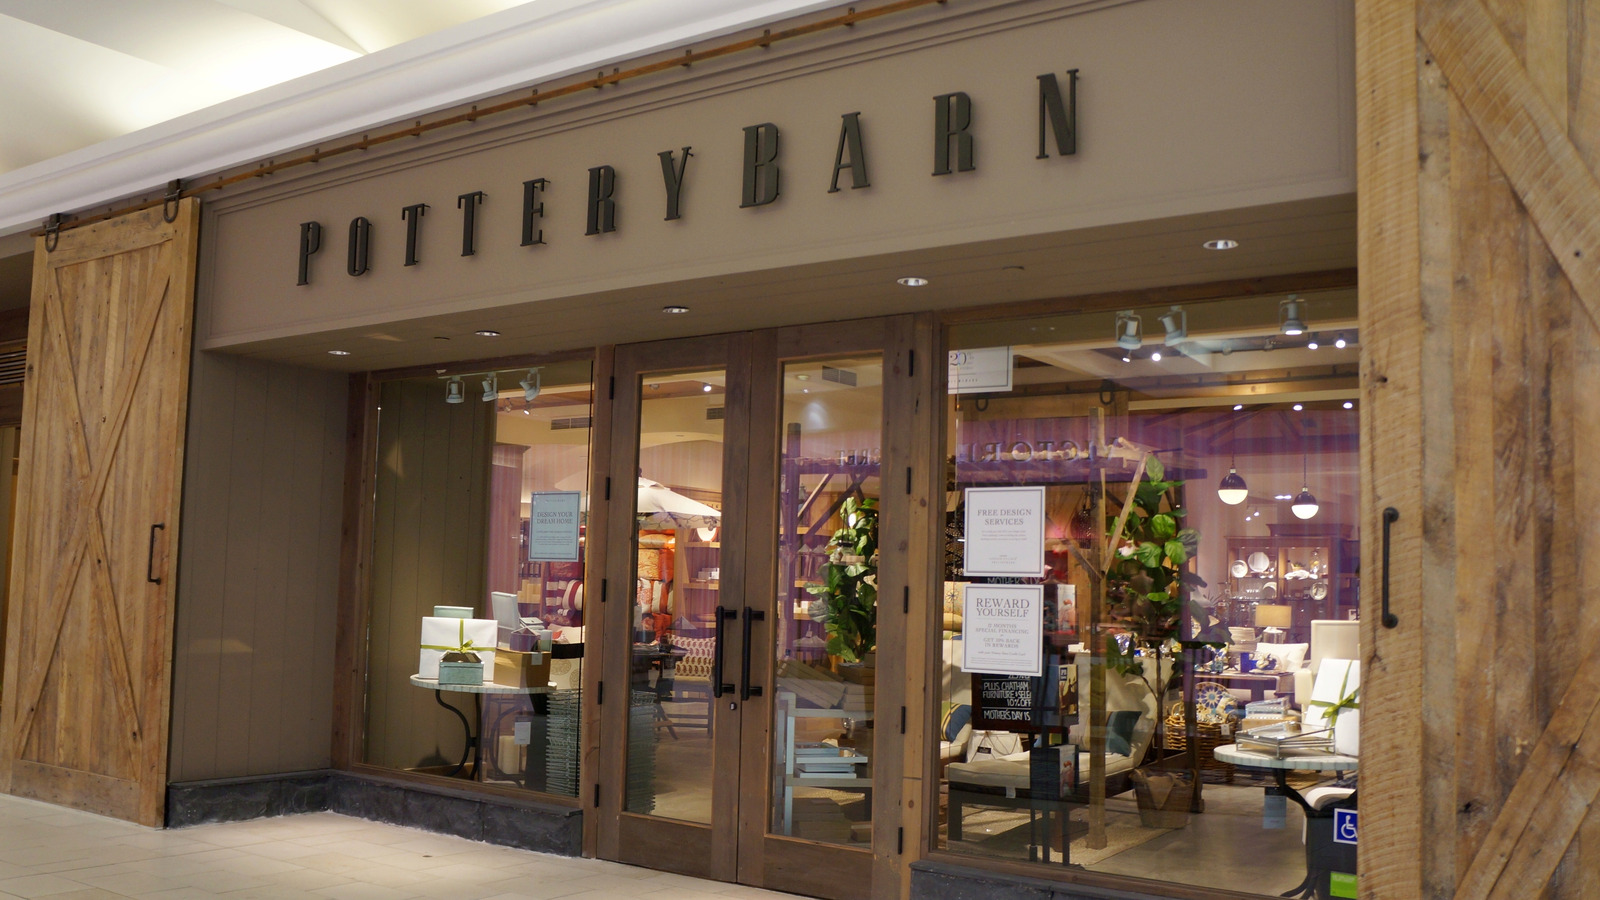 Pottery Barn Outlet - 4 tips